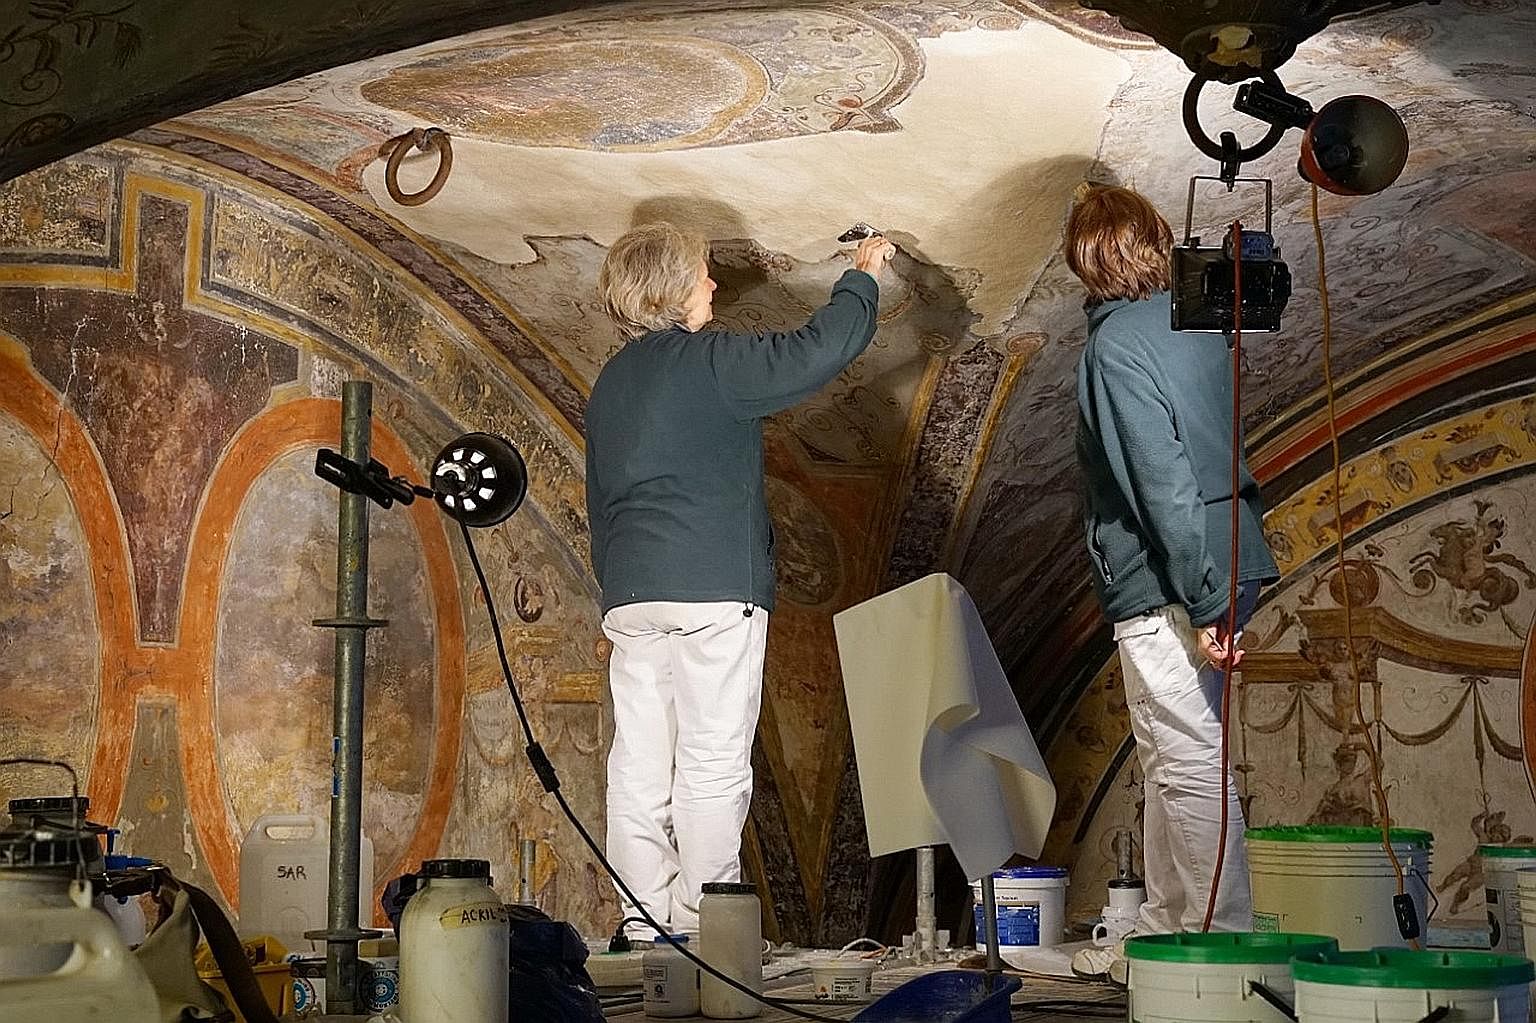 Japanese luxury fashion firm Kuipo's donation of €780,000 has made it possible for the Renaissance frescoes of the Michelozzo courtyard of Palazzo Vecchio to be restored. And for the first time in ages, visitors are allowed inside the burial chambe